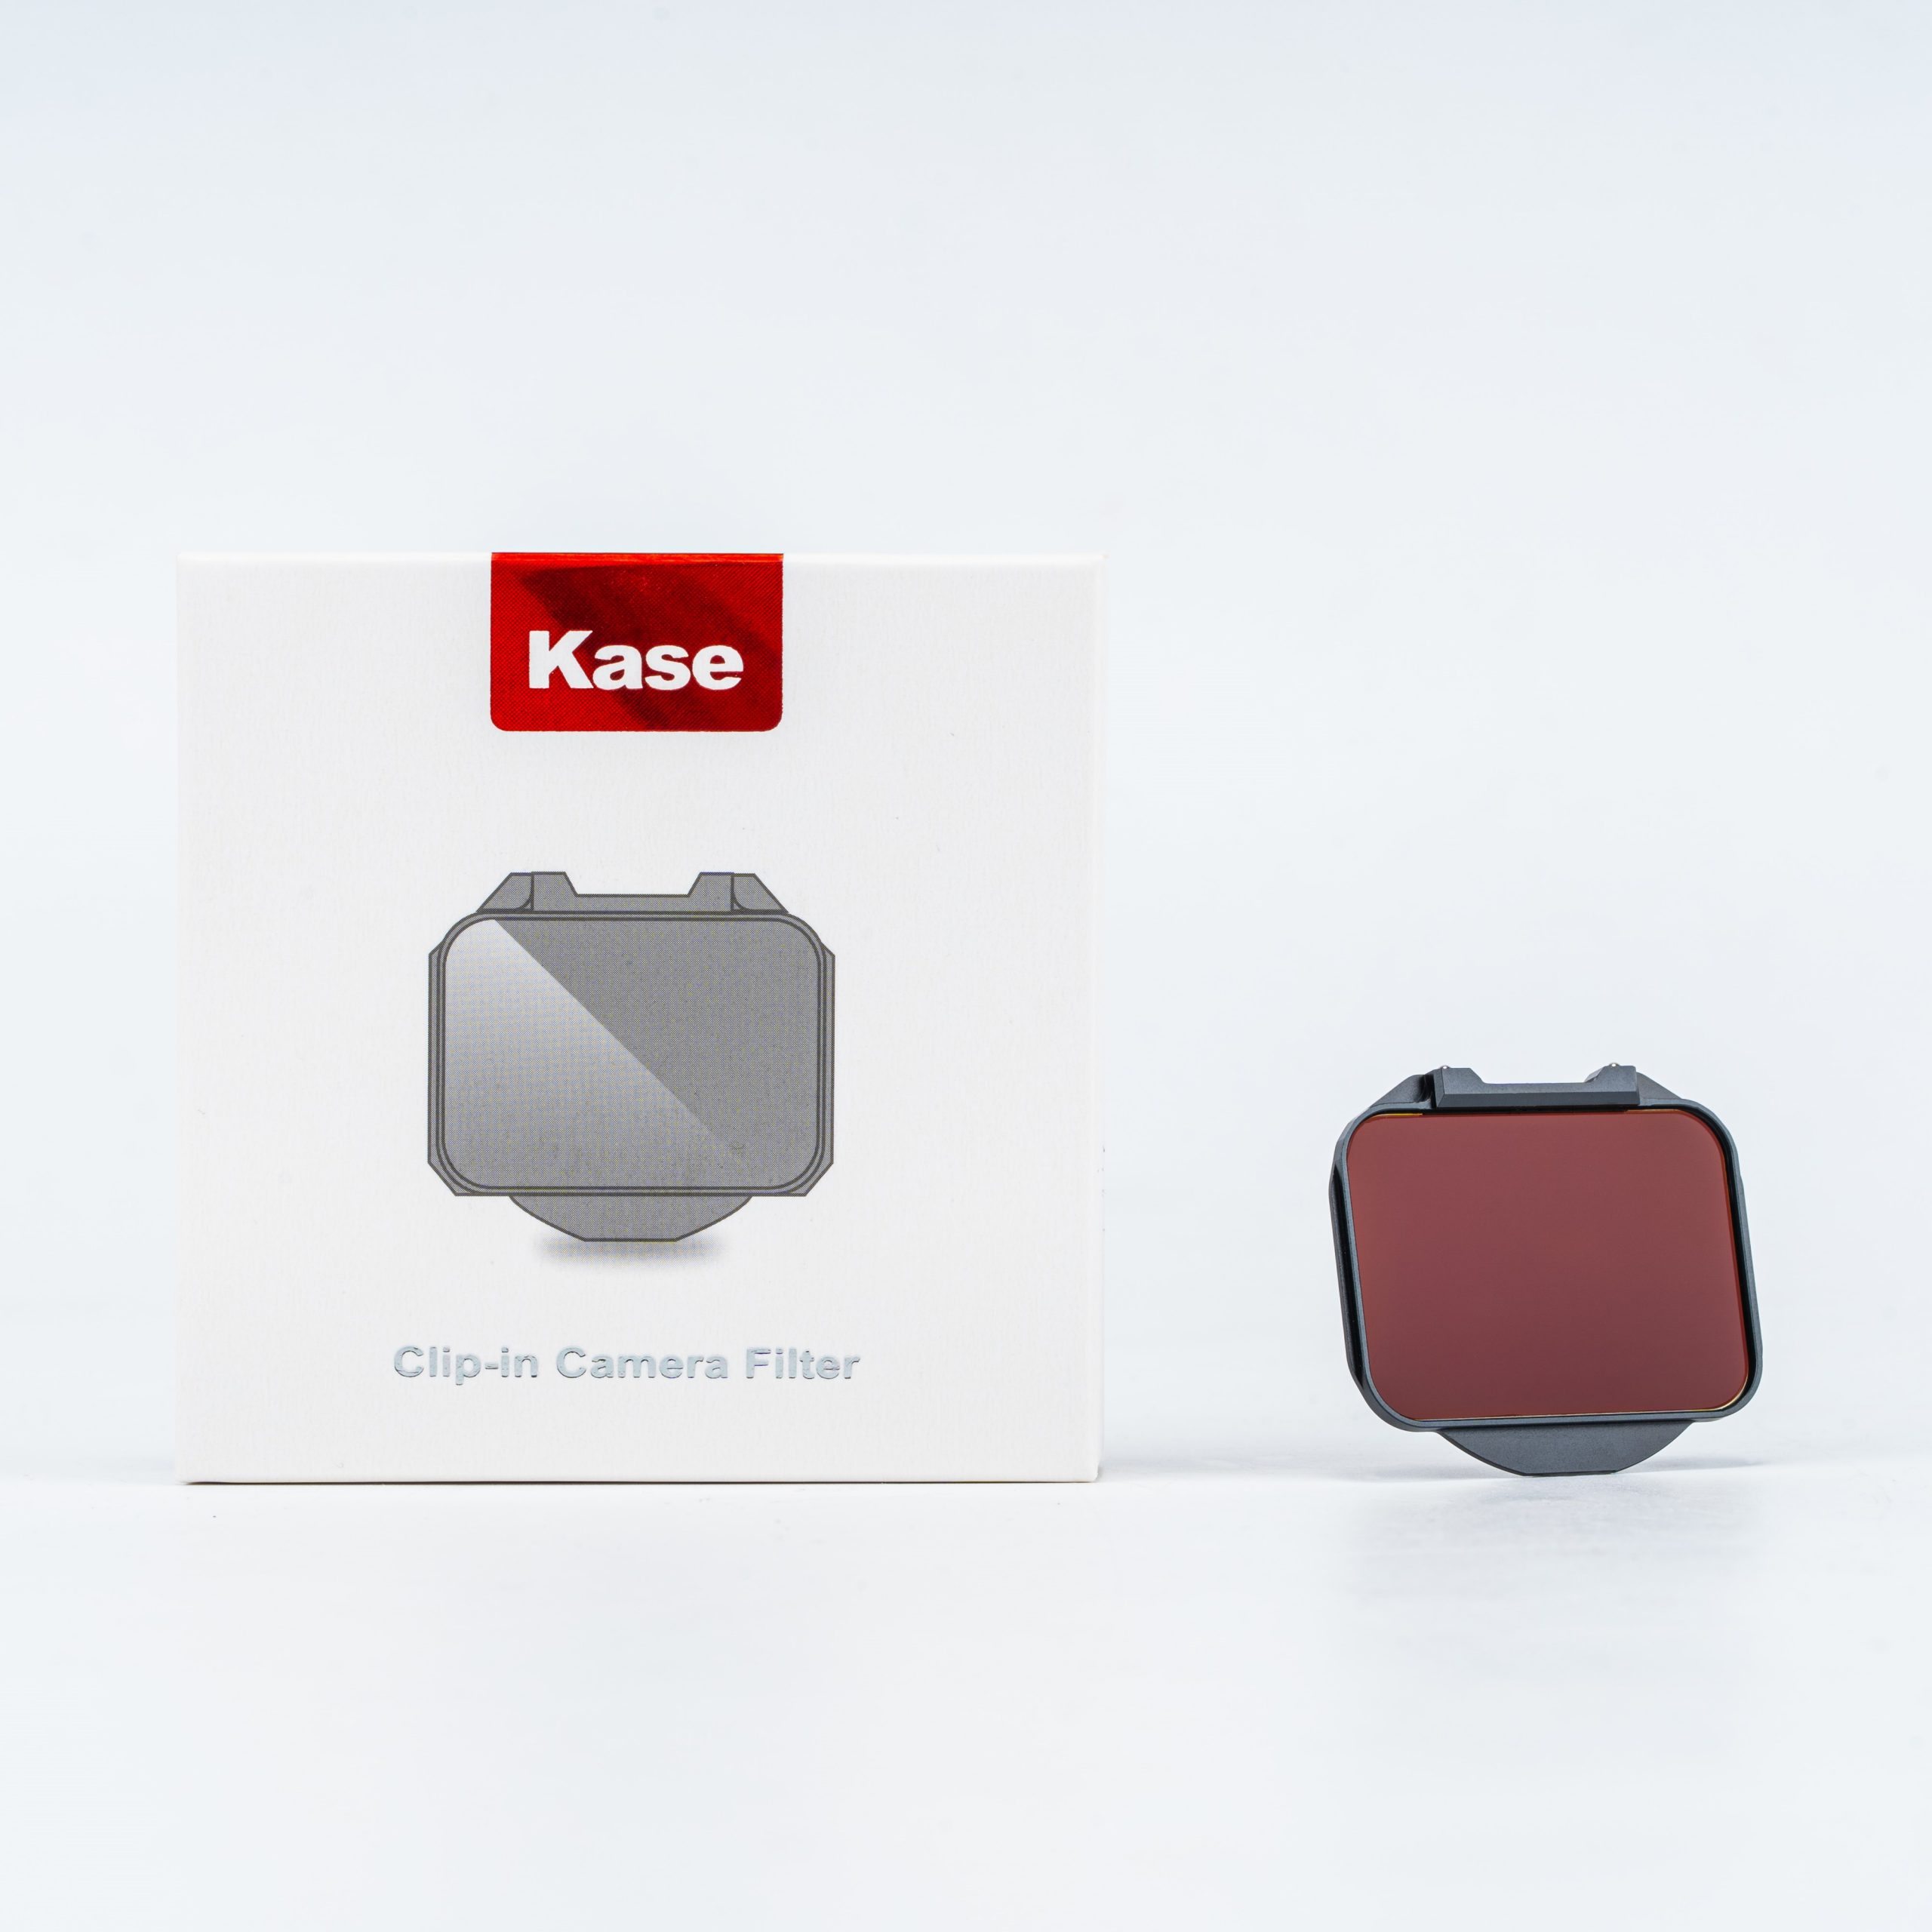 Kase Clip-in ND64 ND1.8 6 Stops Filter,Built-in Camera ND Filter Optical Glass for Sony Alpha Camera A7/A7 II/A7 III/A7R/A7R II/A7R III/A7R IV/A7S/A7S II/A7S III/A9/A9 II/FX3 